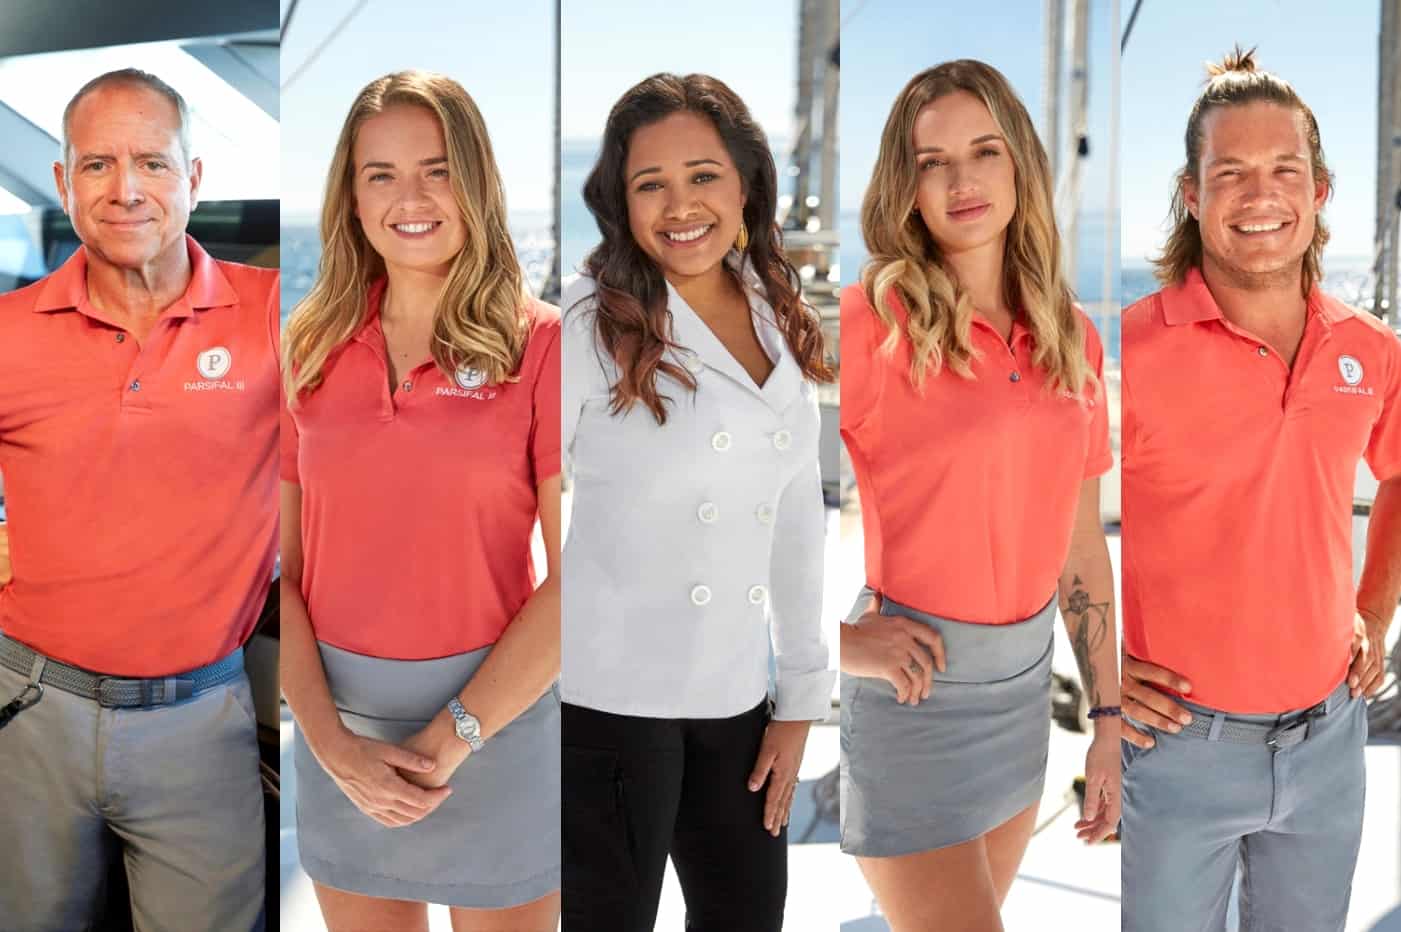 VIDEO: Watch Dramatic Below Deck Sailing Yacht Midseason Trailer! Crew Gets Caught Bad-Mouthing Guests as Dani Claims "It's God's Will" If She Gets Pregnant, Plus Gary Feuds With Daisy and Seemingly Tosses Sydney Aside For Alli